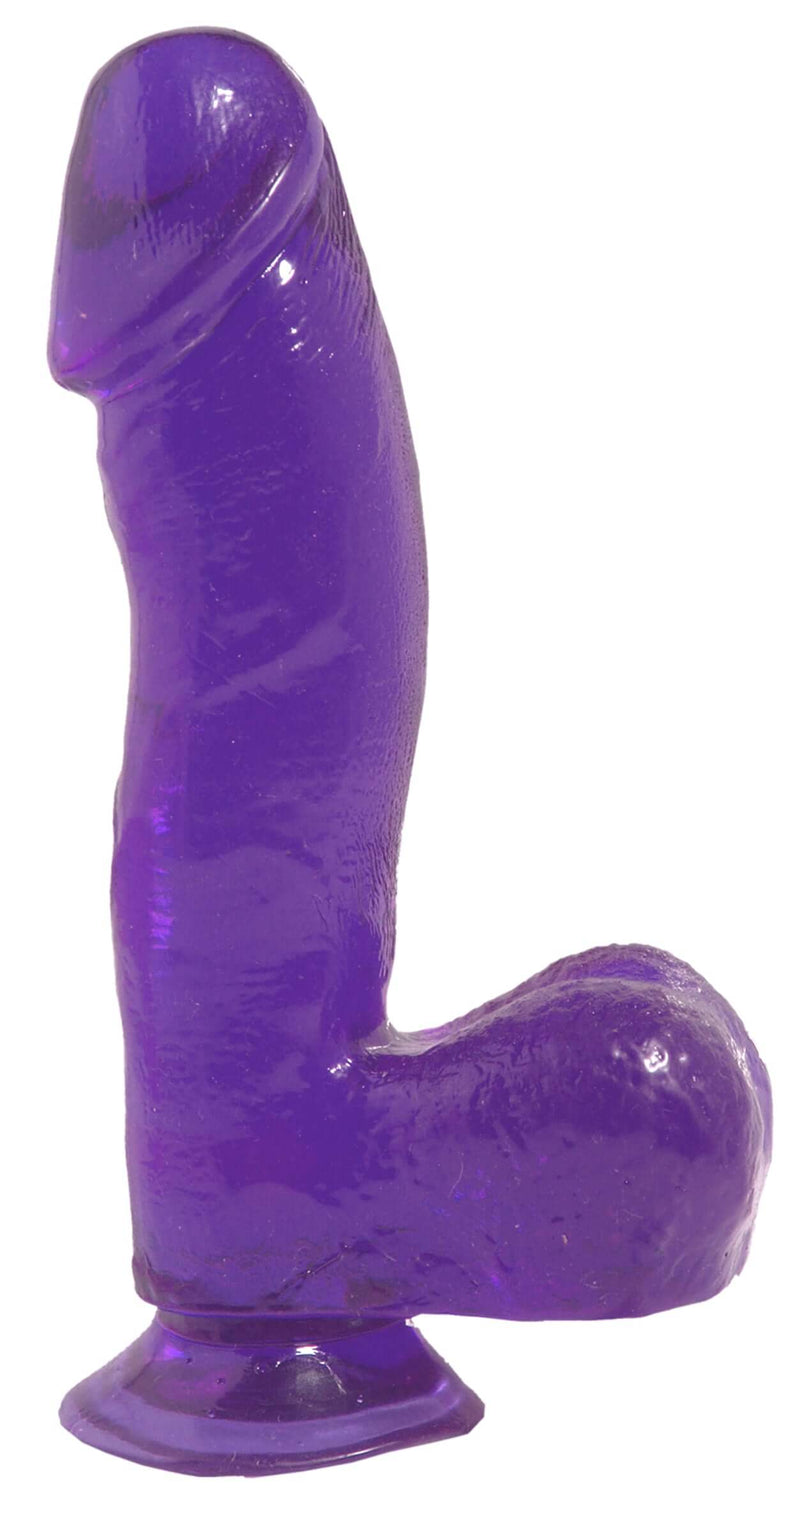 Basix Rubber Works 6.5" Ballsy Dong with suction cup